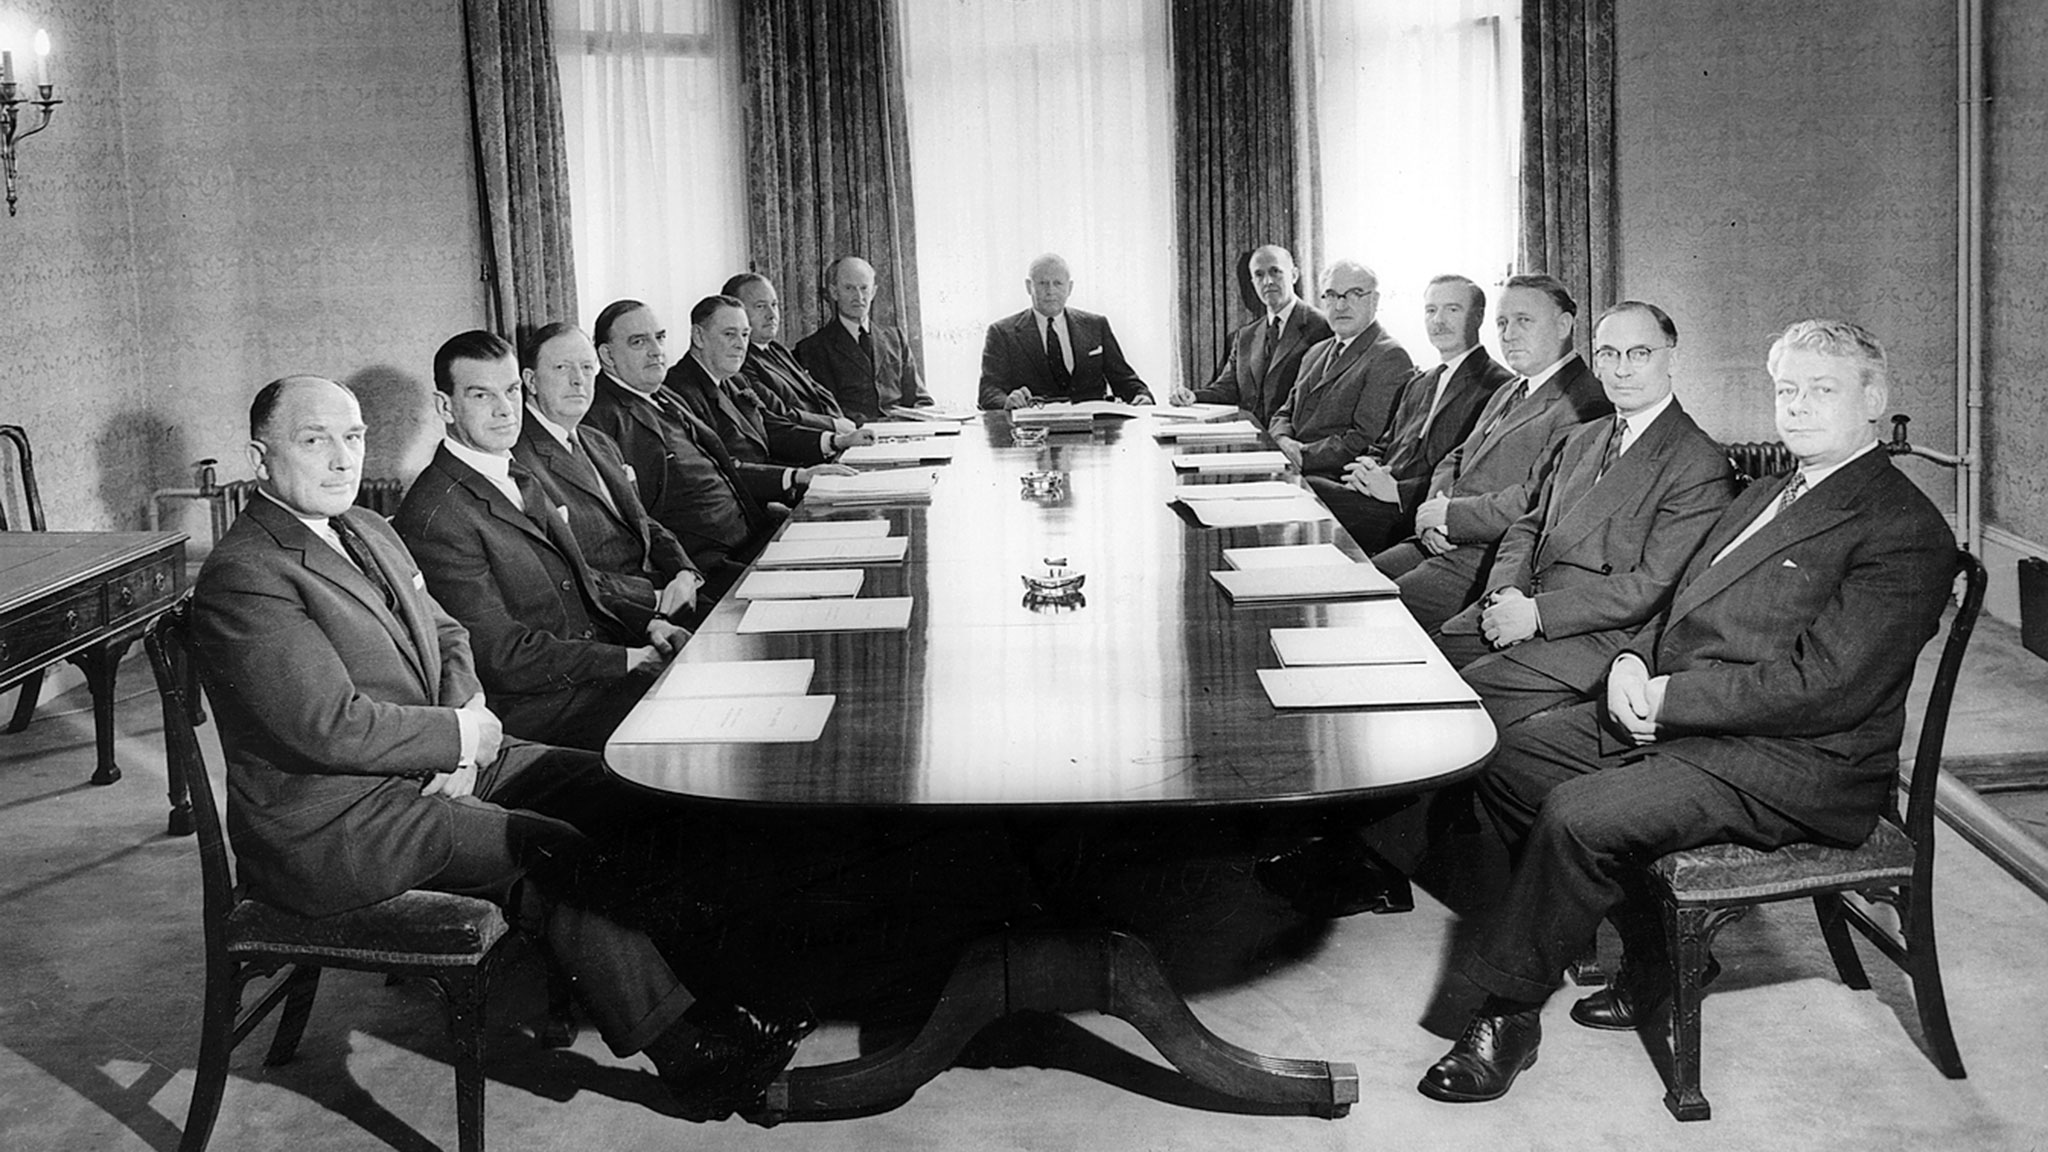 A boardroom without diversity